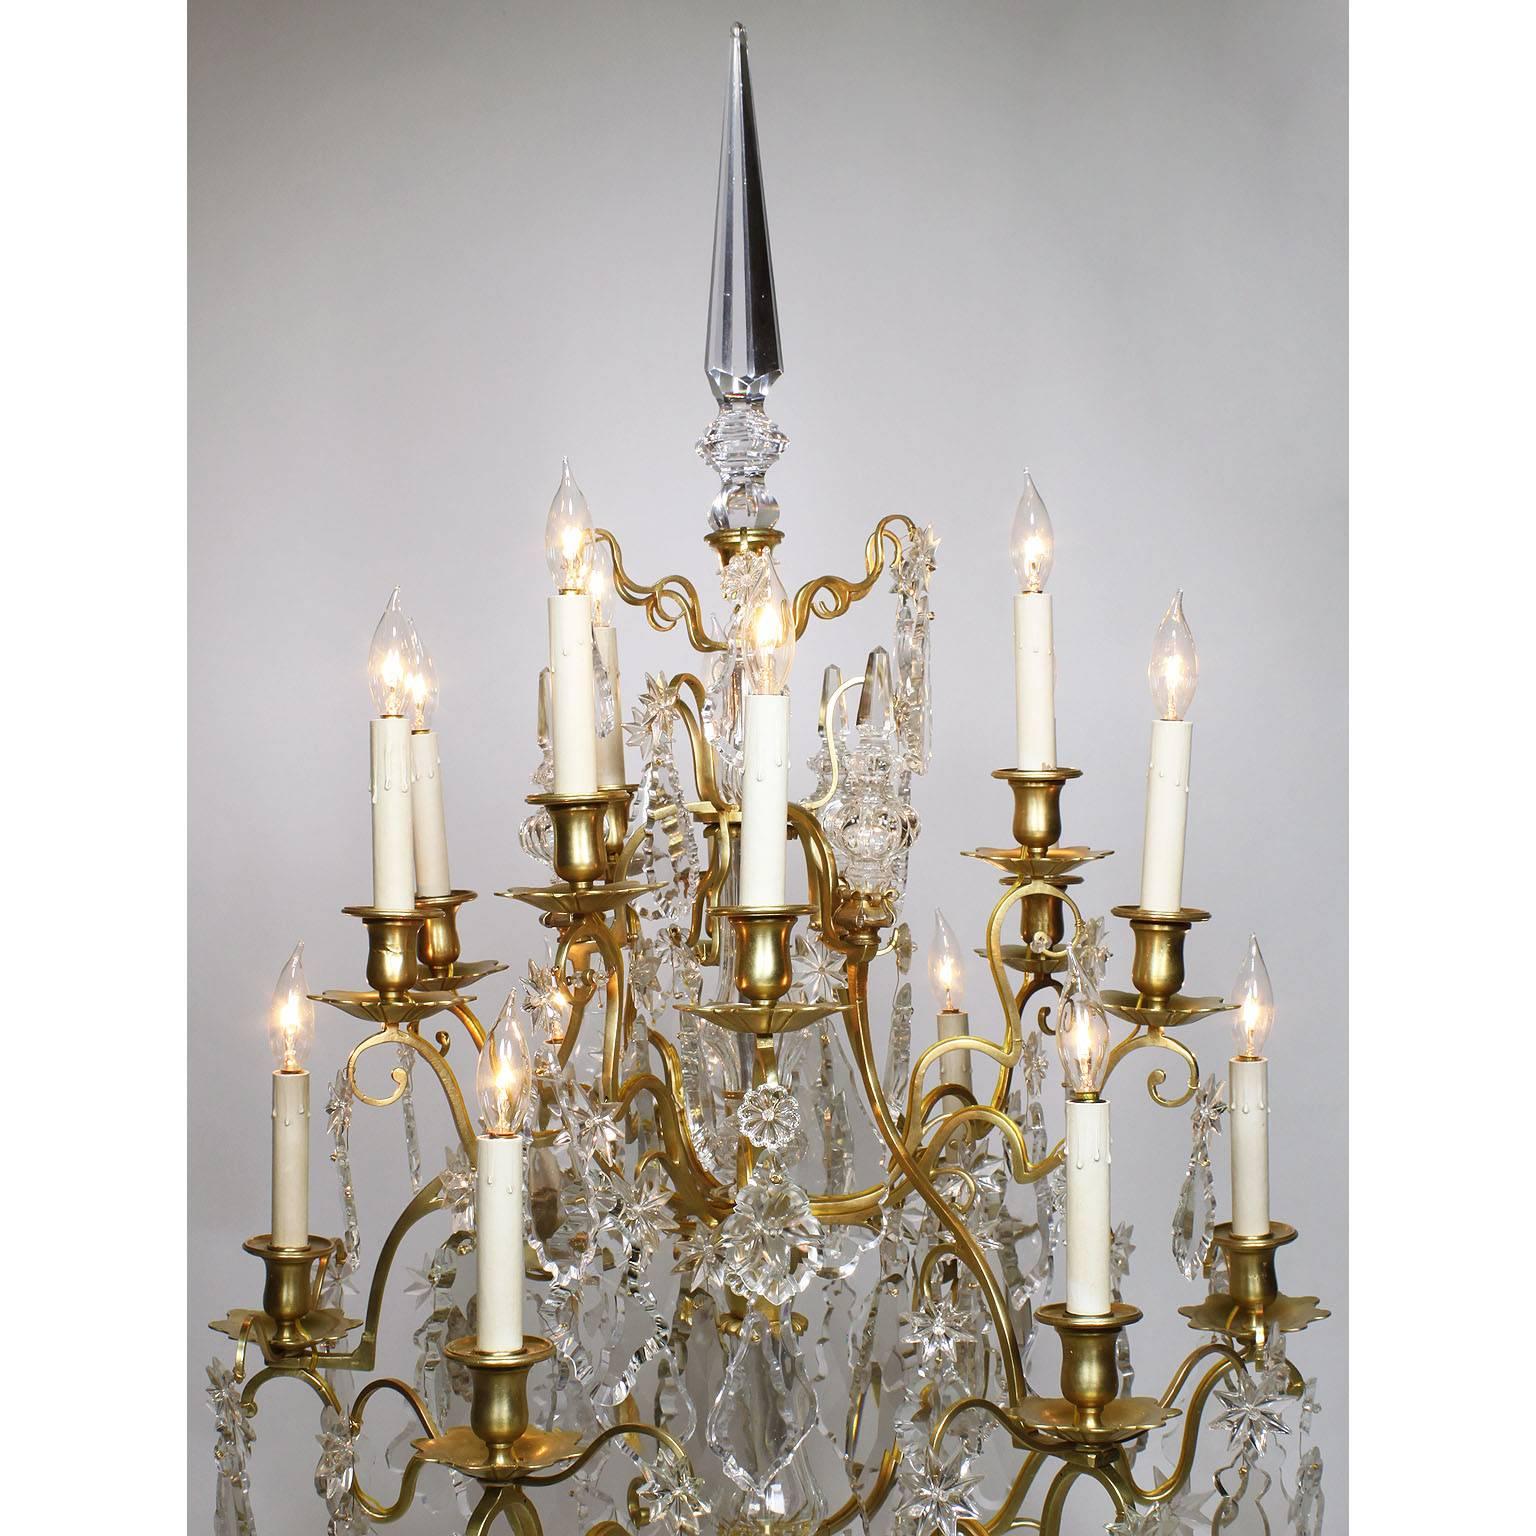 Gilt Palatial Pair of French, 19th-20th Century Louis XV Style Girandoles Table Lamps